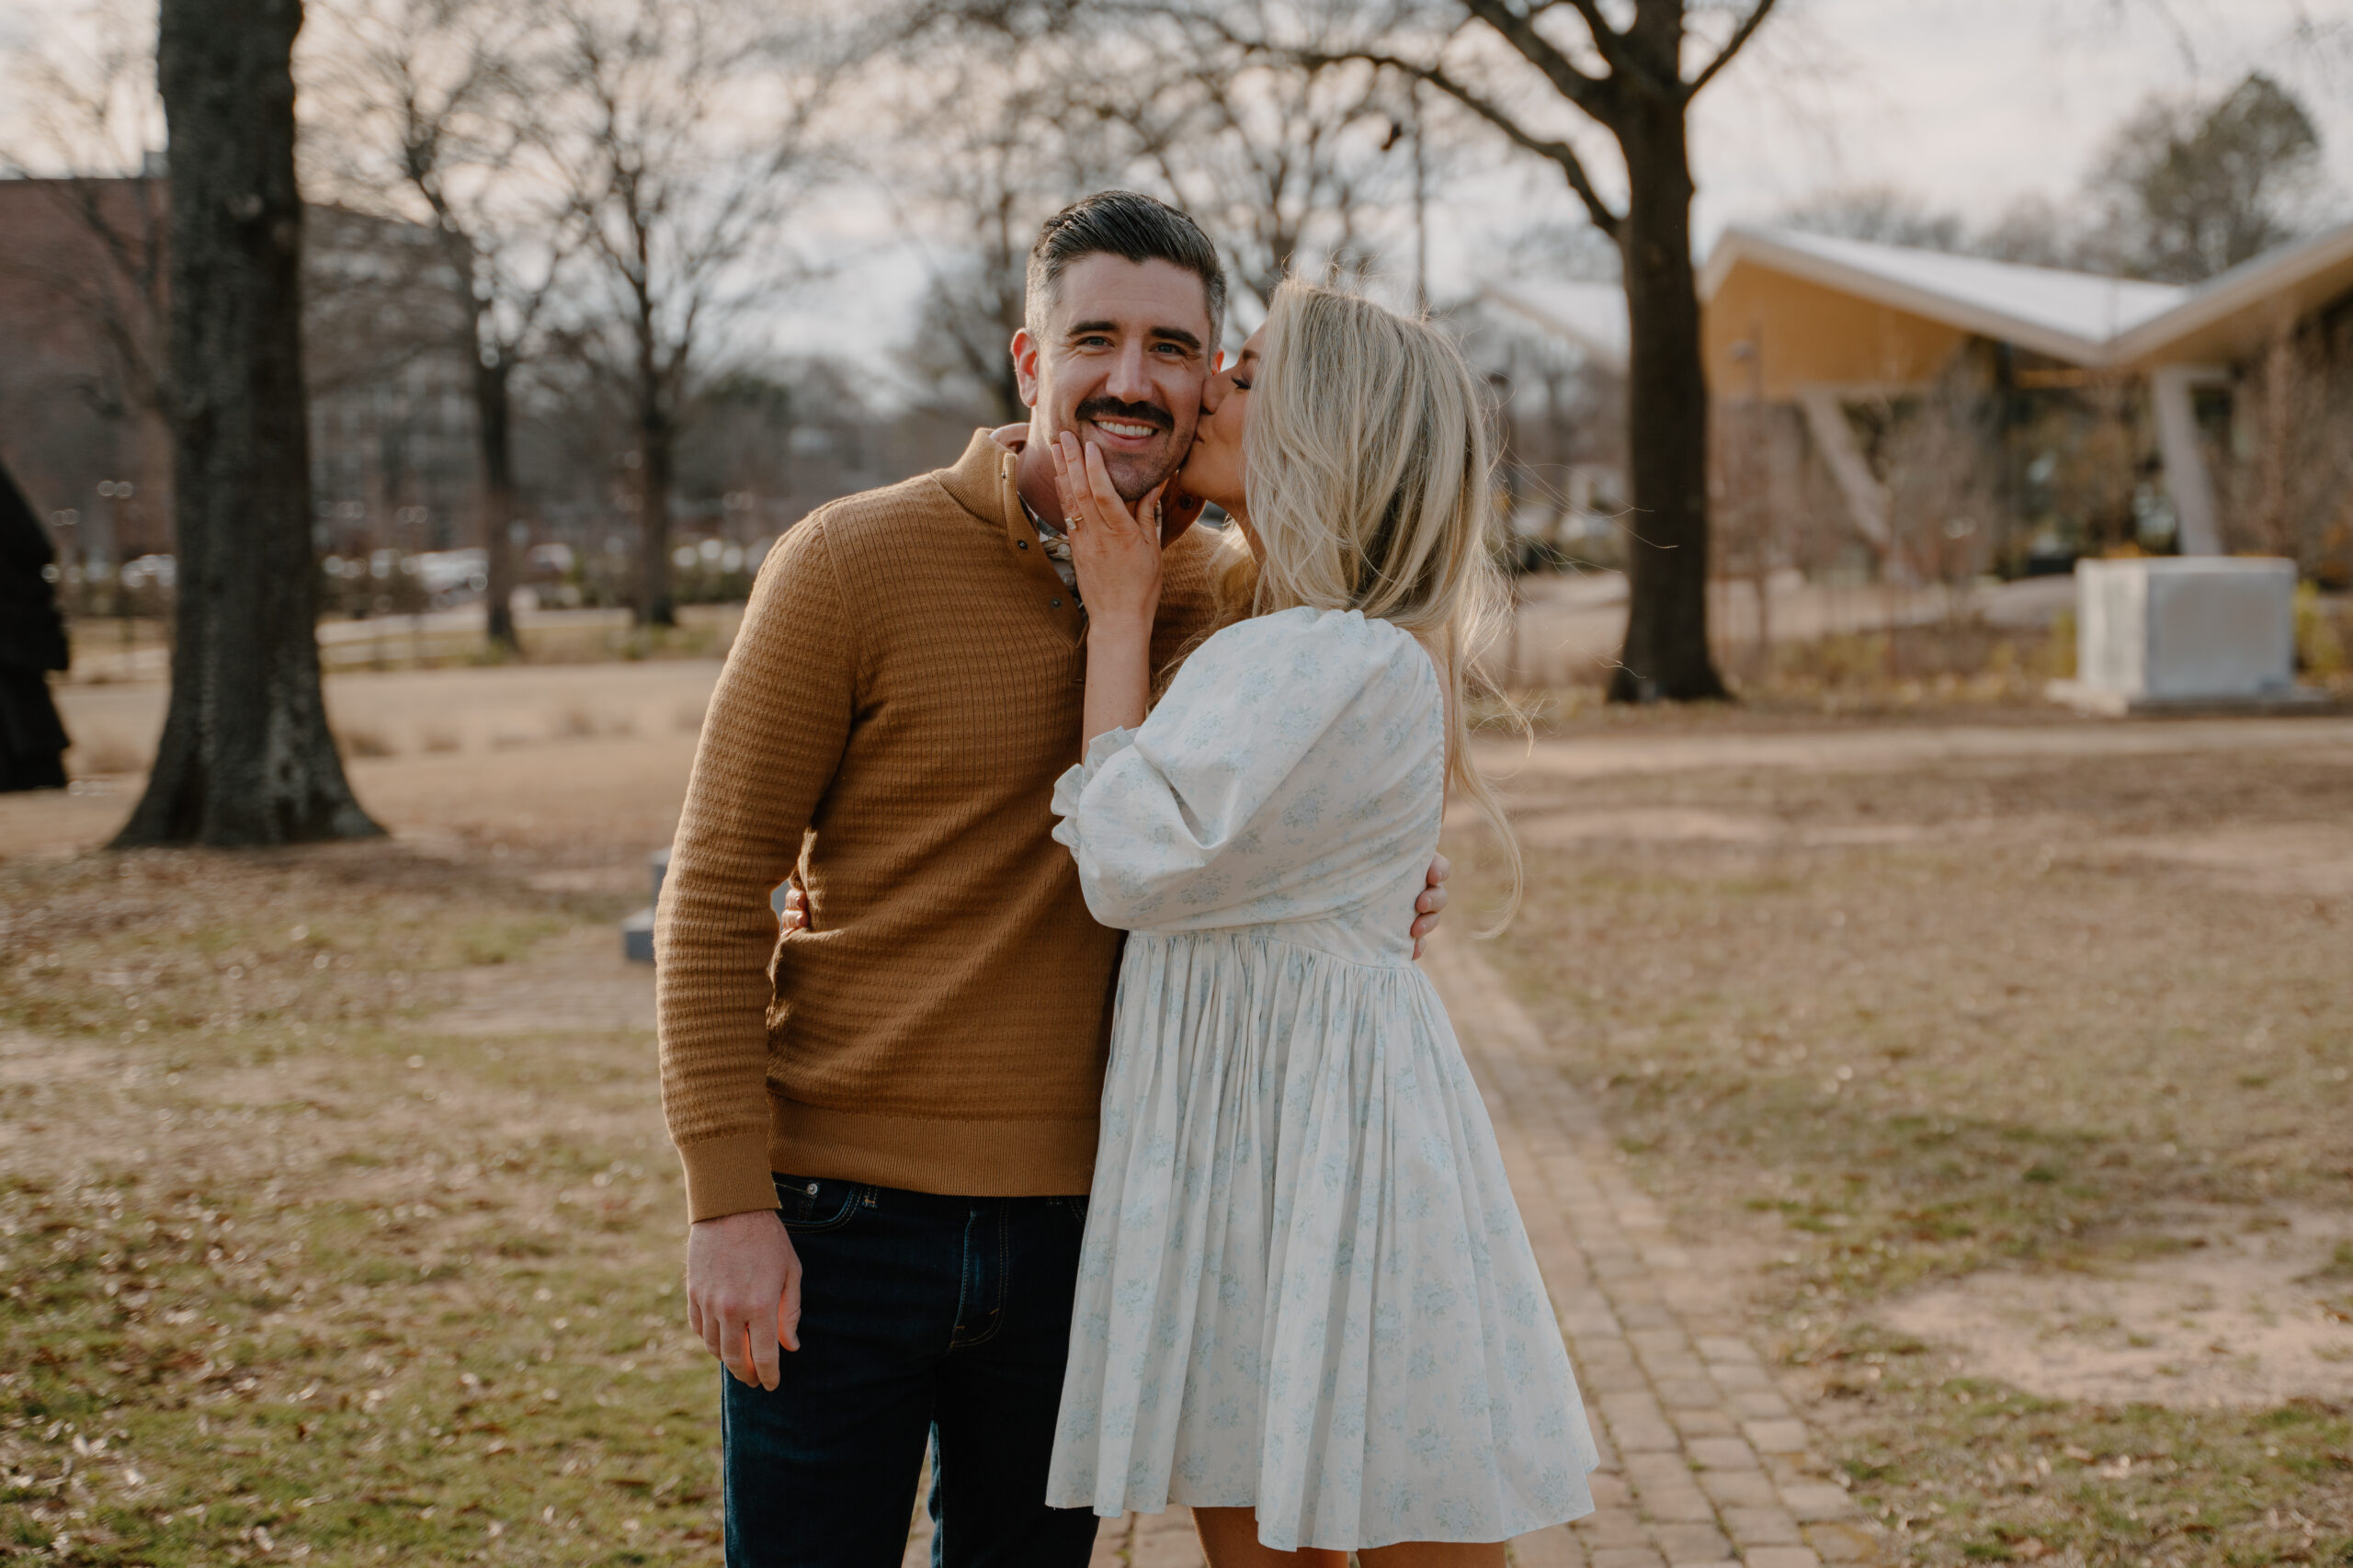 photo of girlfriend kissing boyfriend on the cheek and showing off her engagement ring